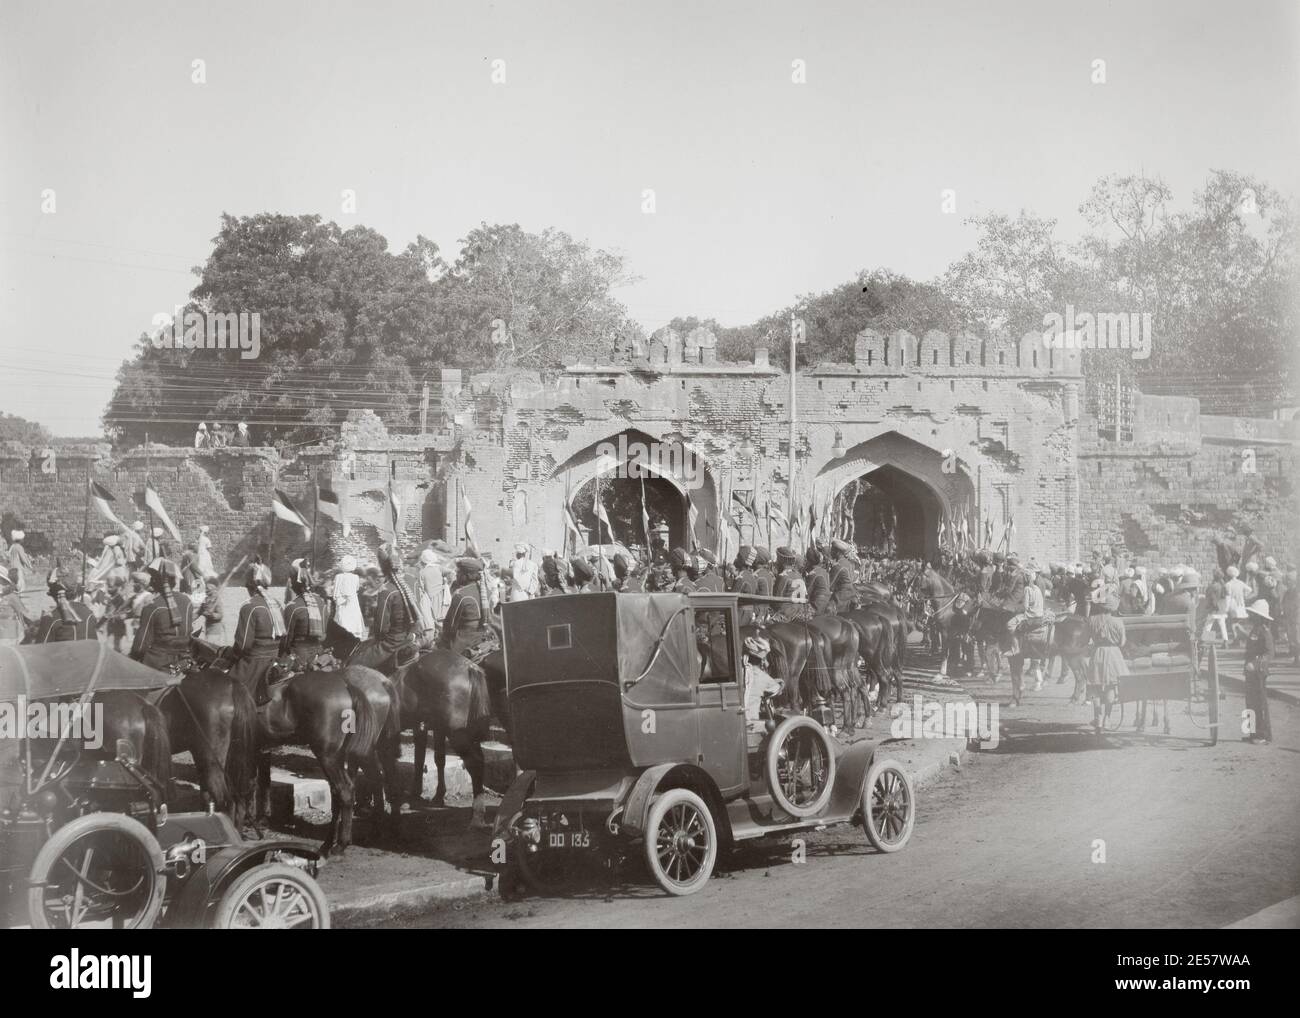 Delhi at the time of the Delhi Durbar, probably 1911, though very similar to the 1903 event. Eary motor cars and cavalry at the Cashemre, Kashmir Gate. Stock Photo